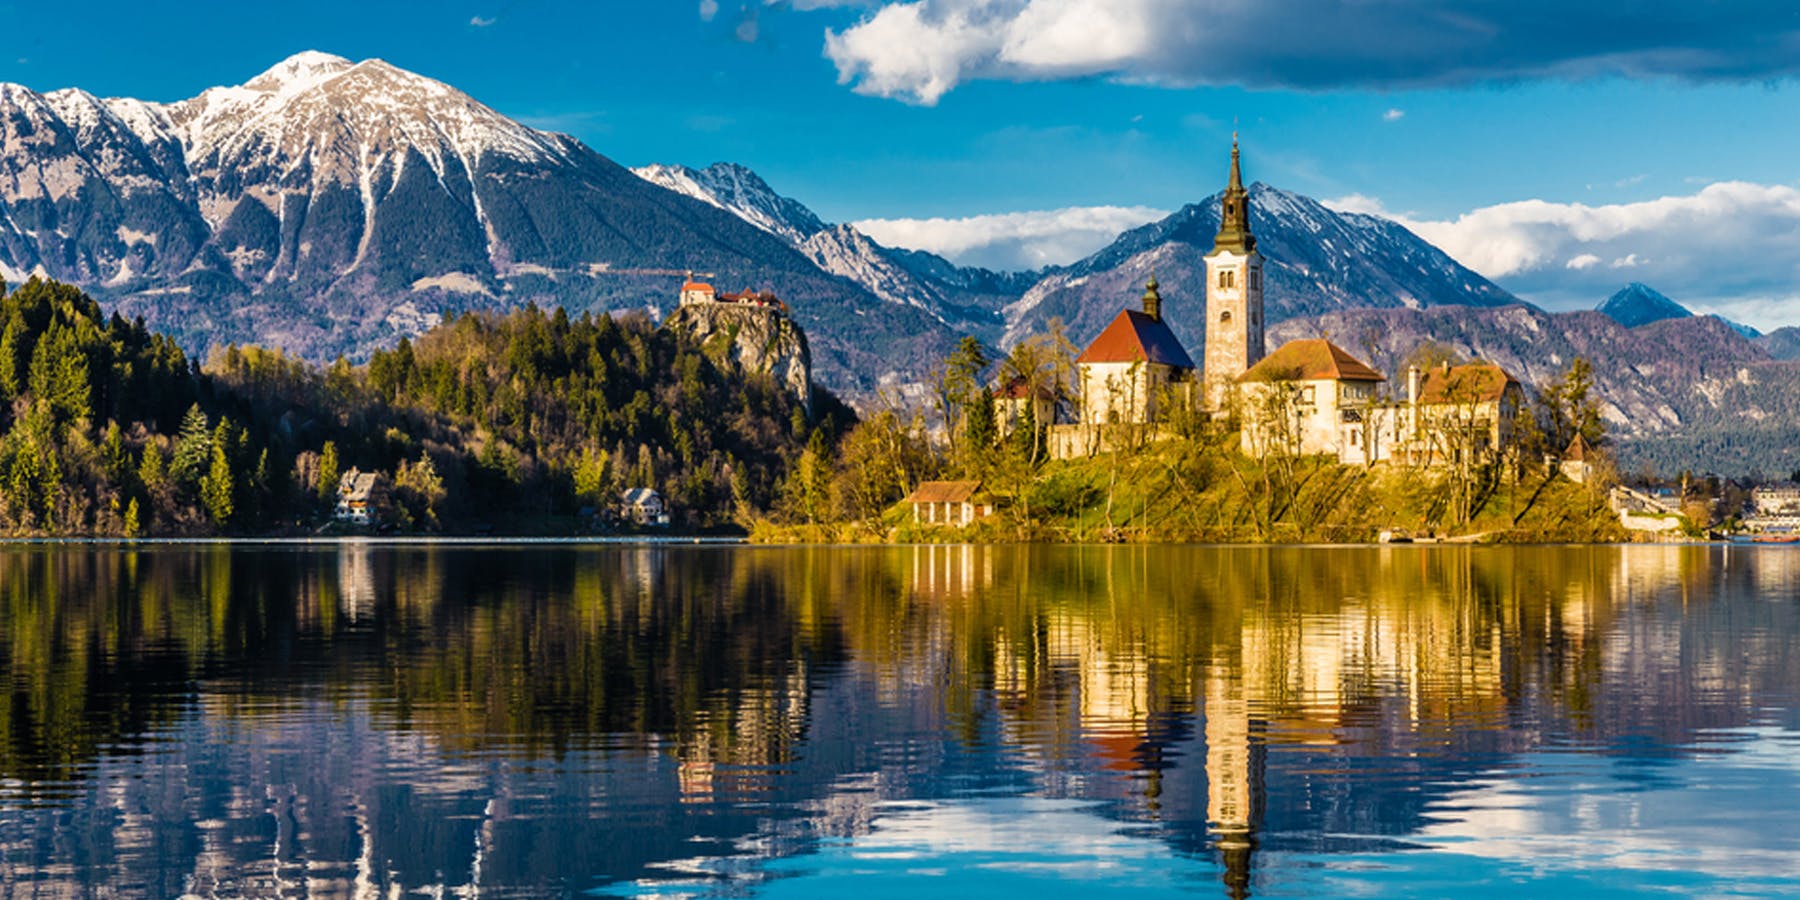 More about Slovenia